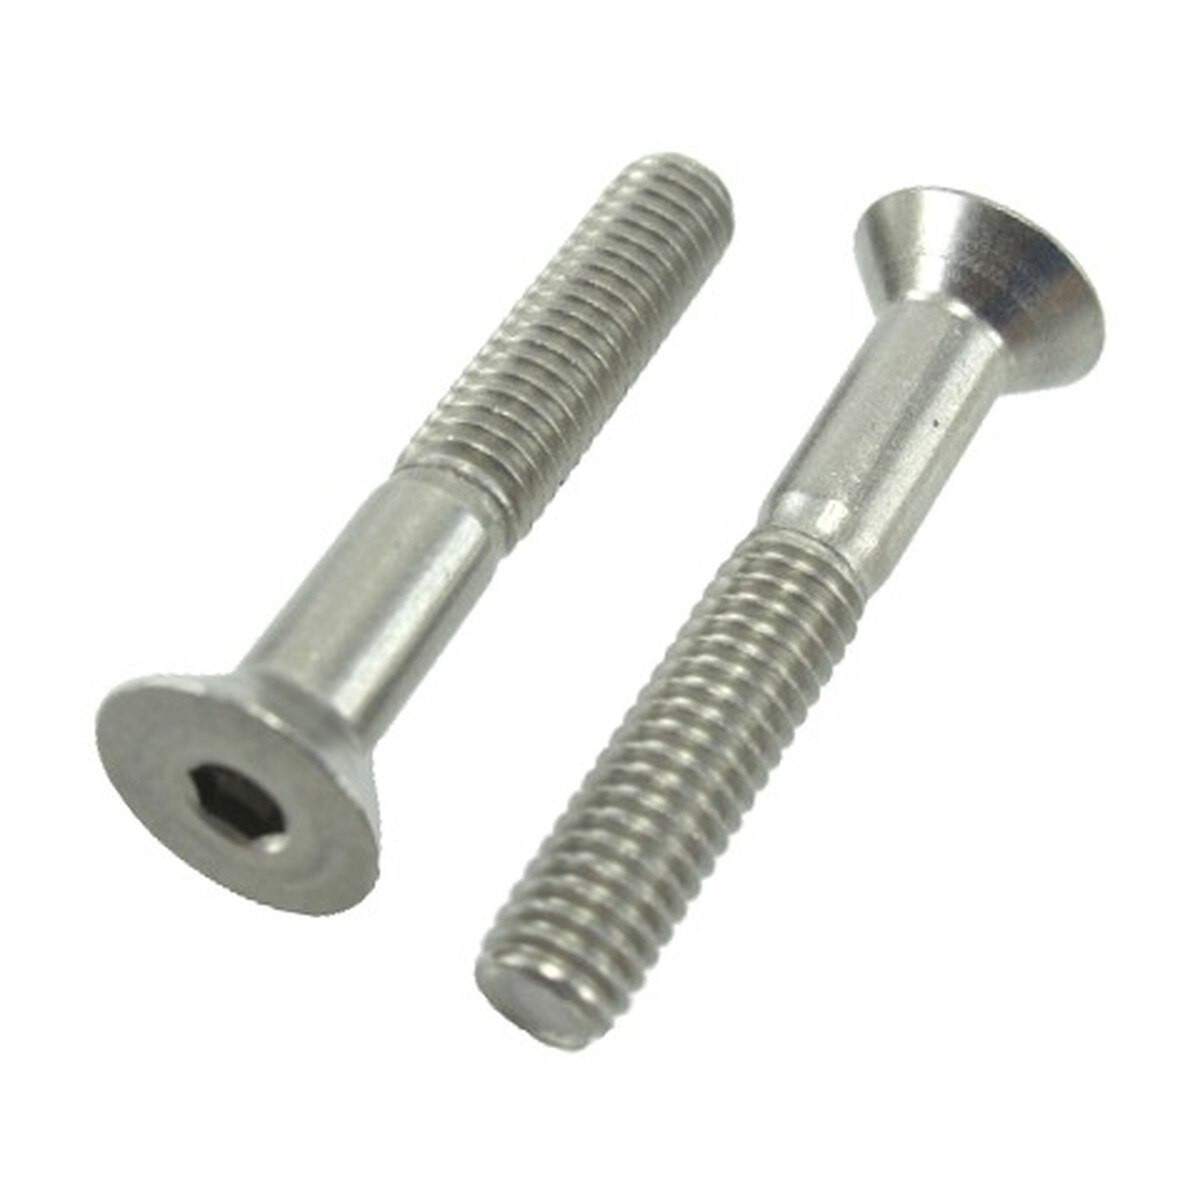 Qty 10 5/8-11 x 2" Stainless Steel Hex Head Cap Screws Bolts 